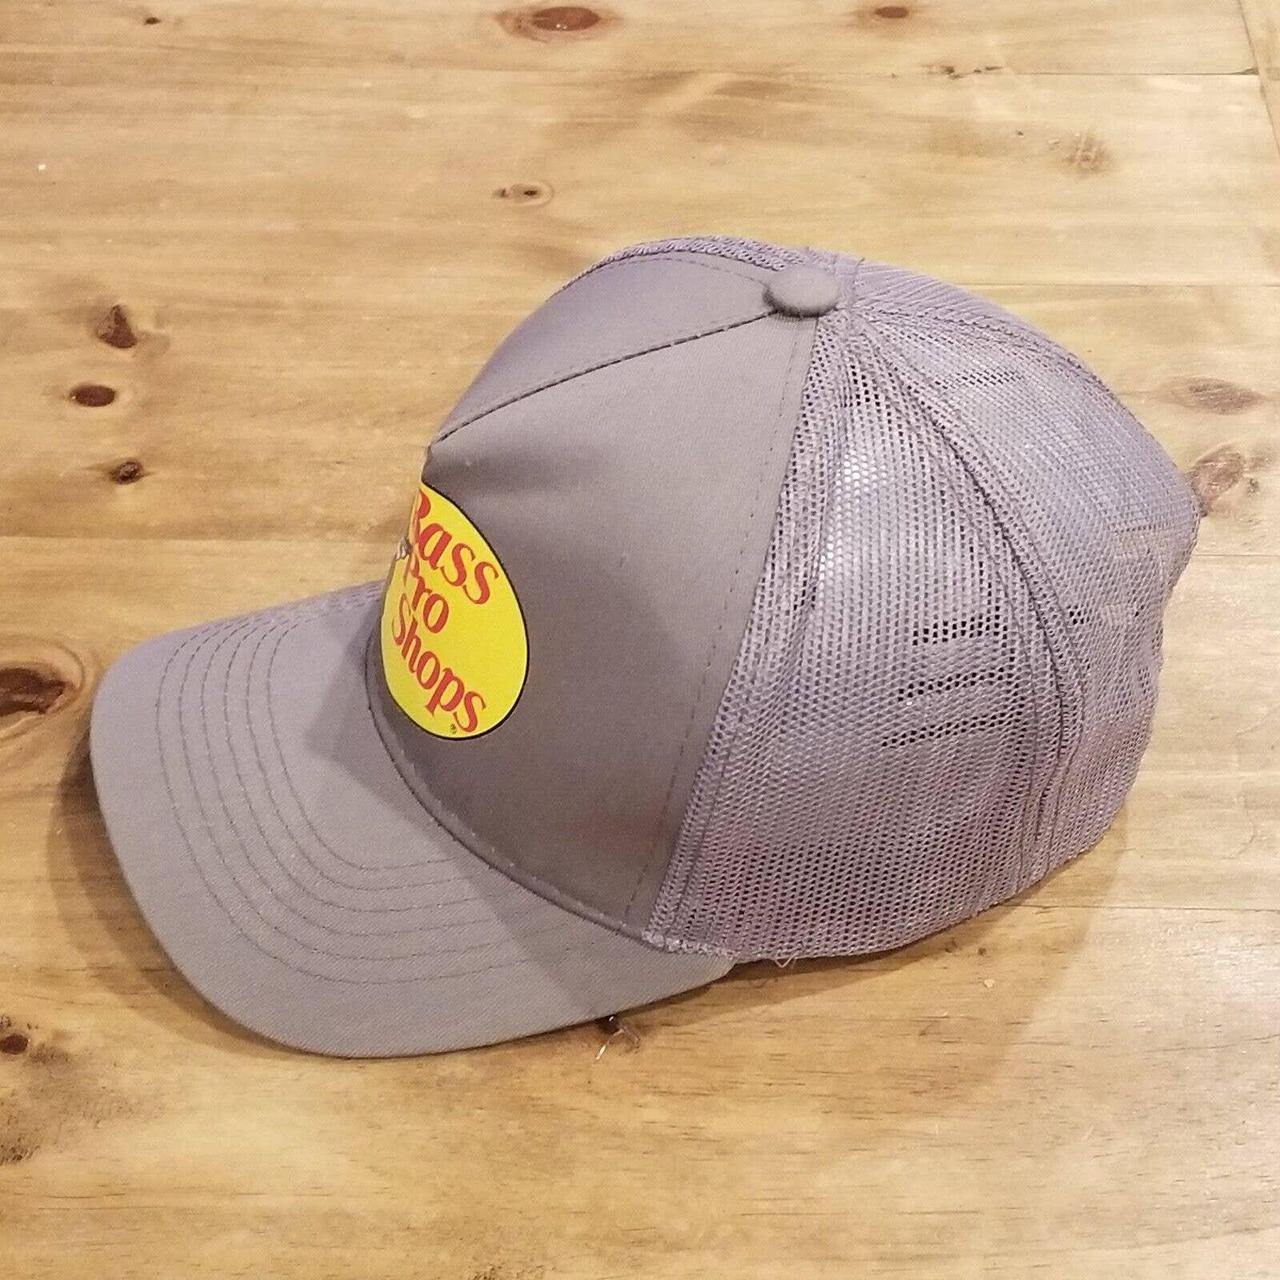 UNISEX Bass Pro Shop Hat One Size Fits All Grey And - Depop